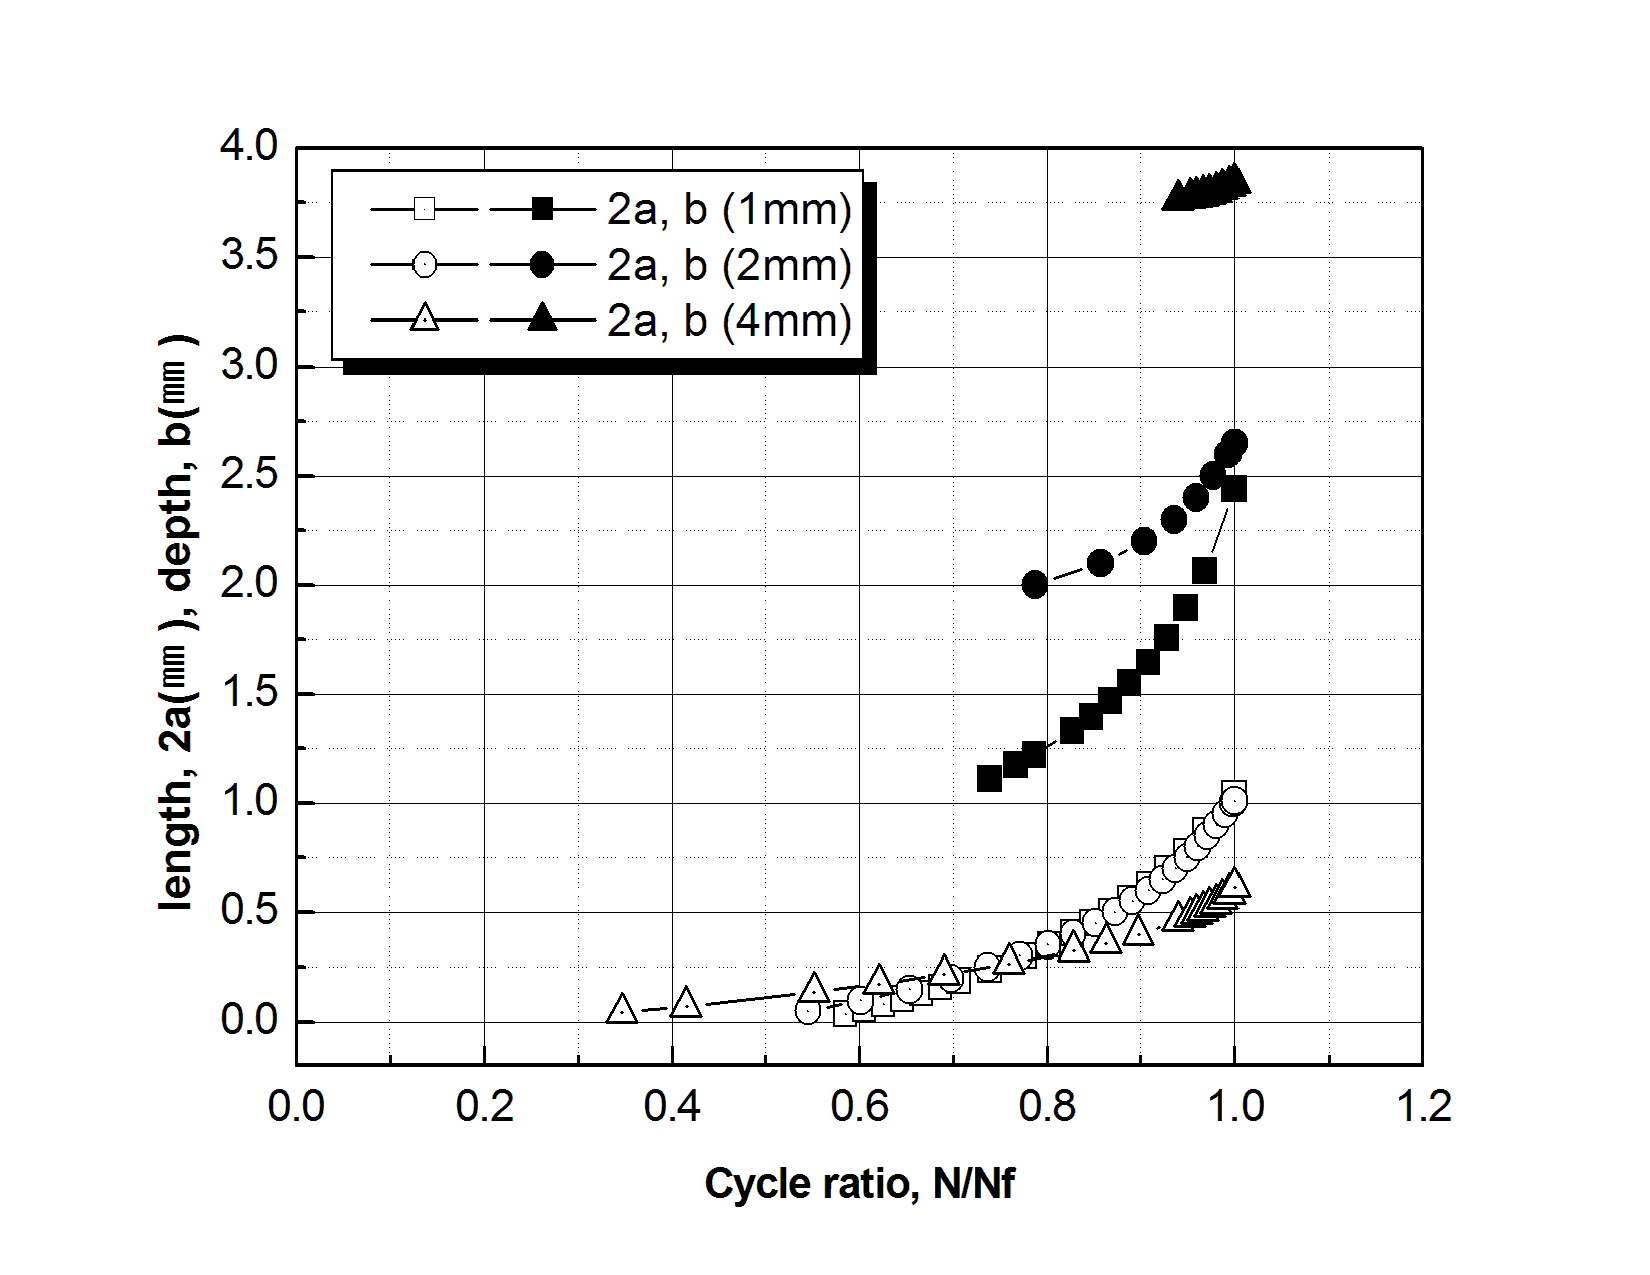 Comparison of crack length and depth behaviors vs cycle ratio for notch size 1㎜, 2㎜ and 4㎜